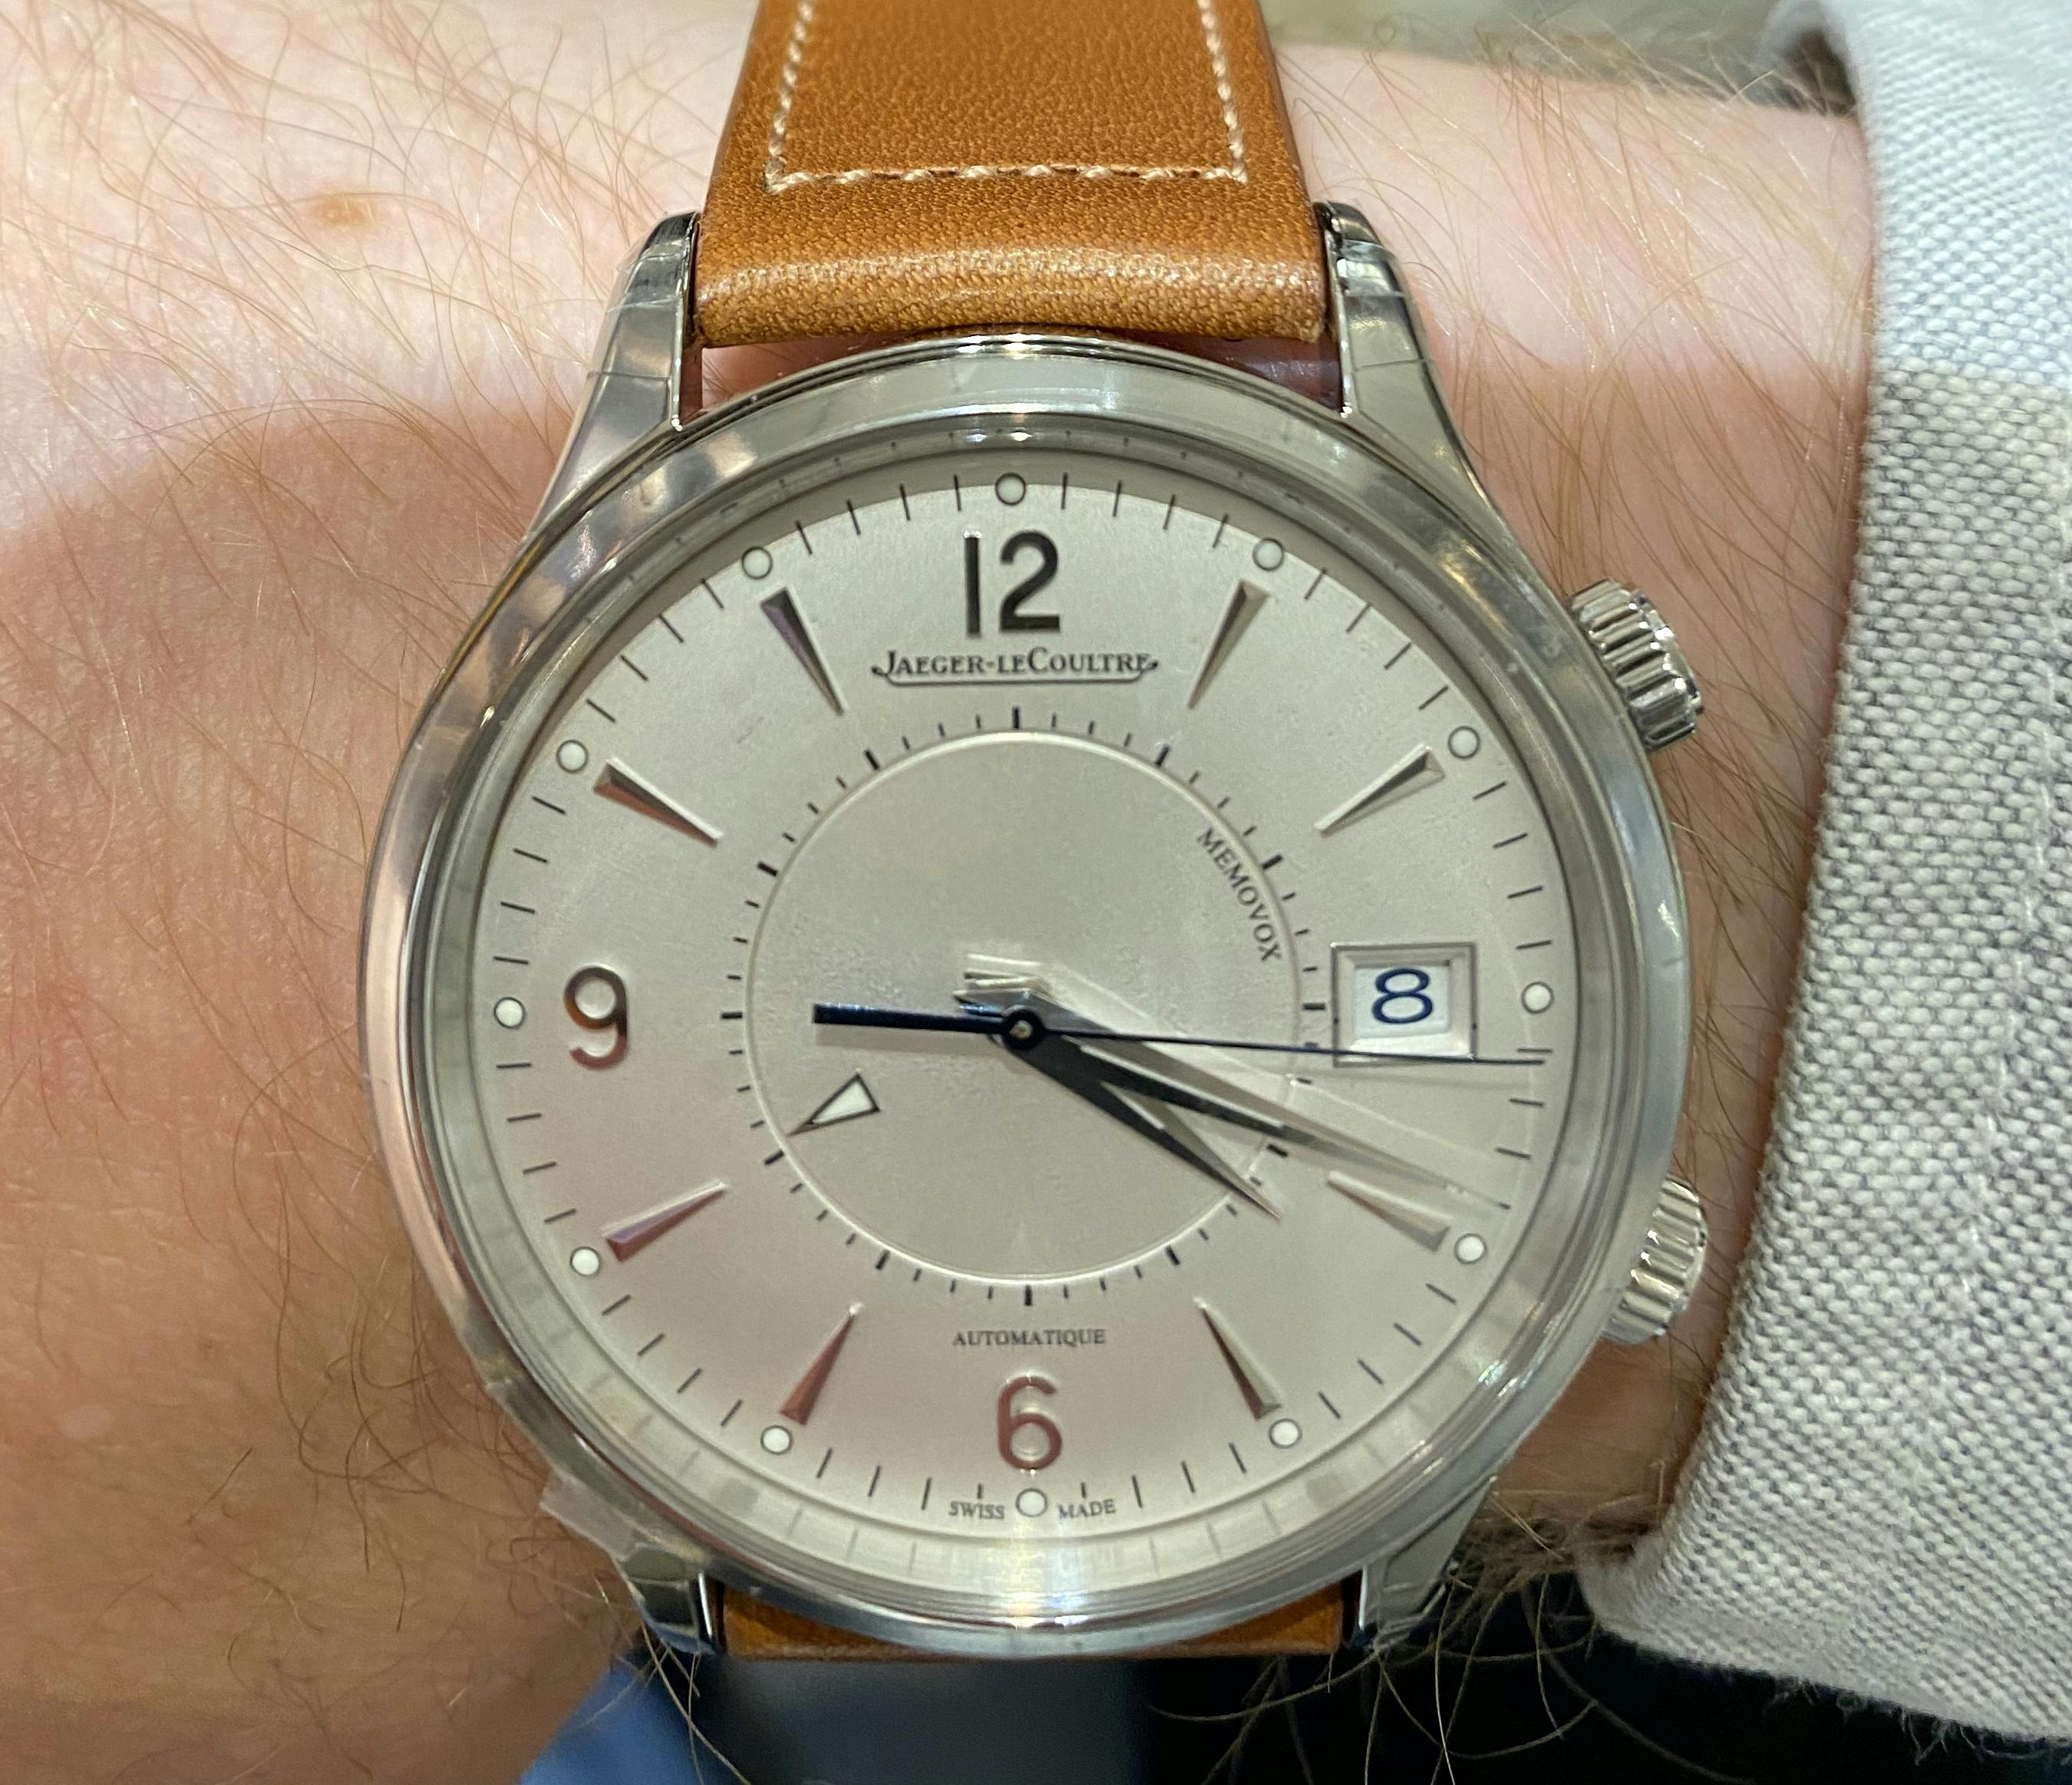 Jaeger-LeCoultre Memovox with date window